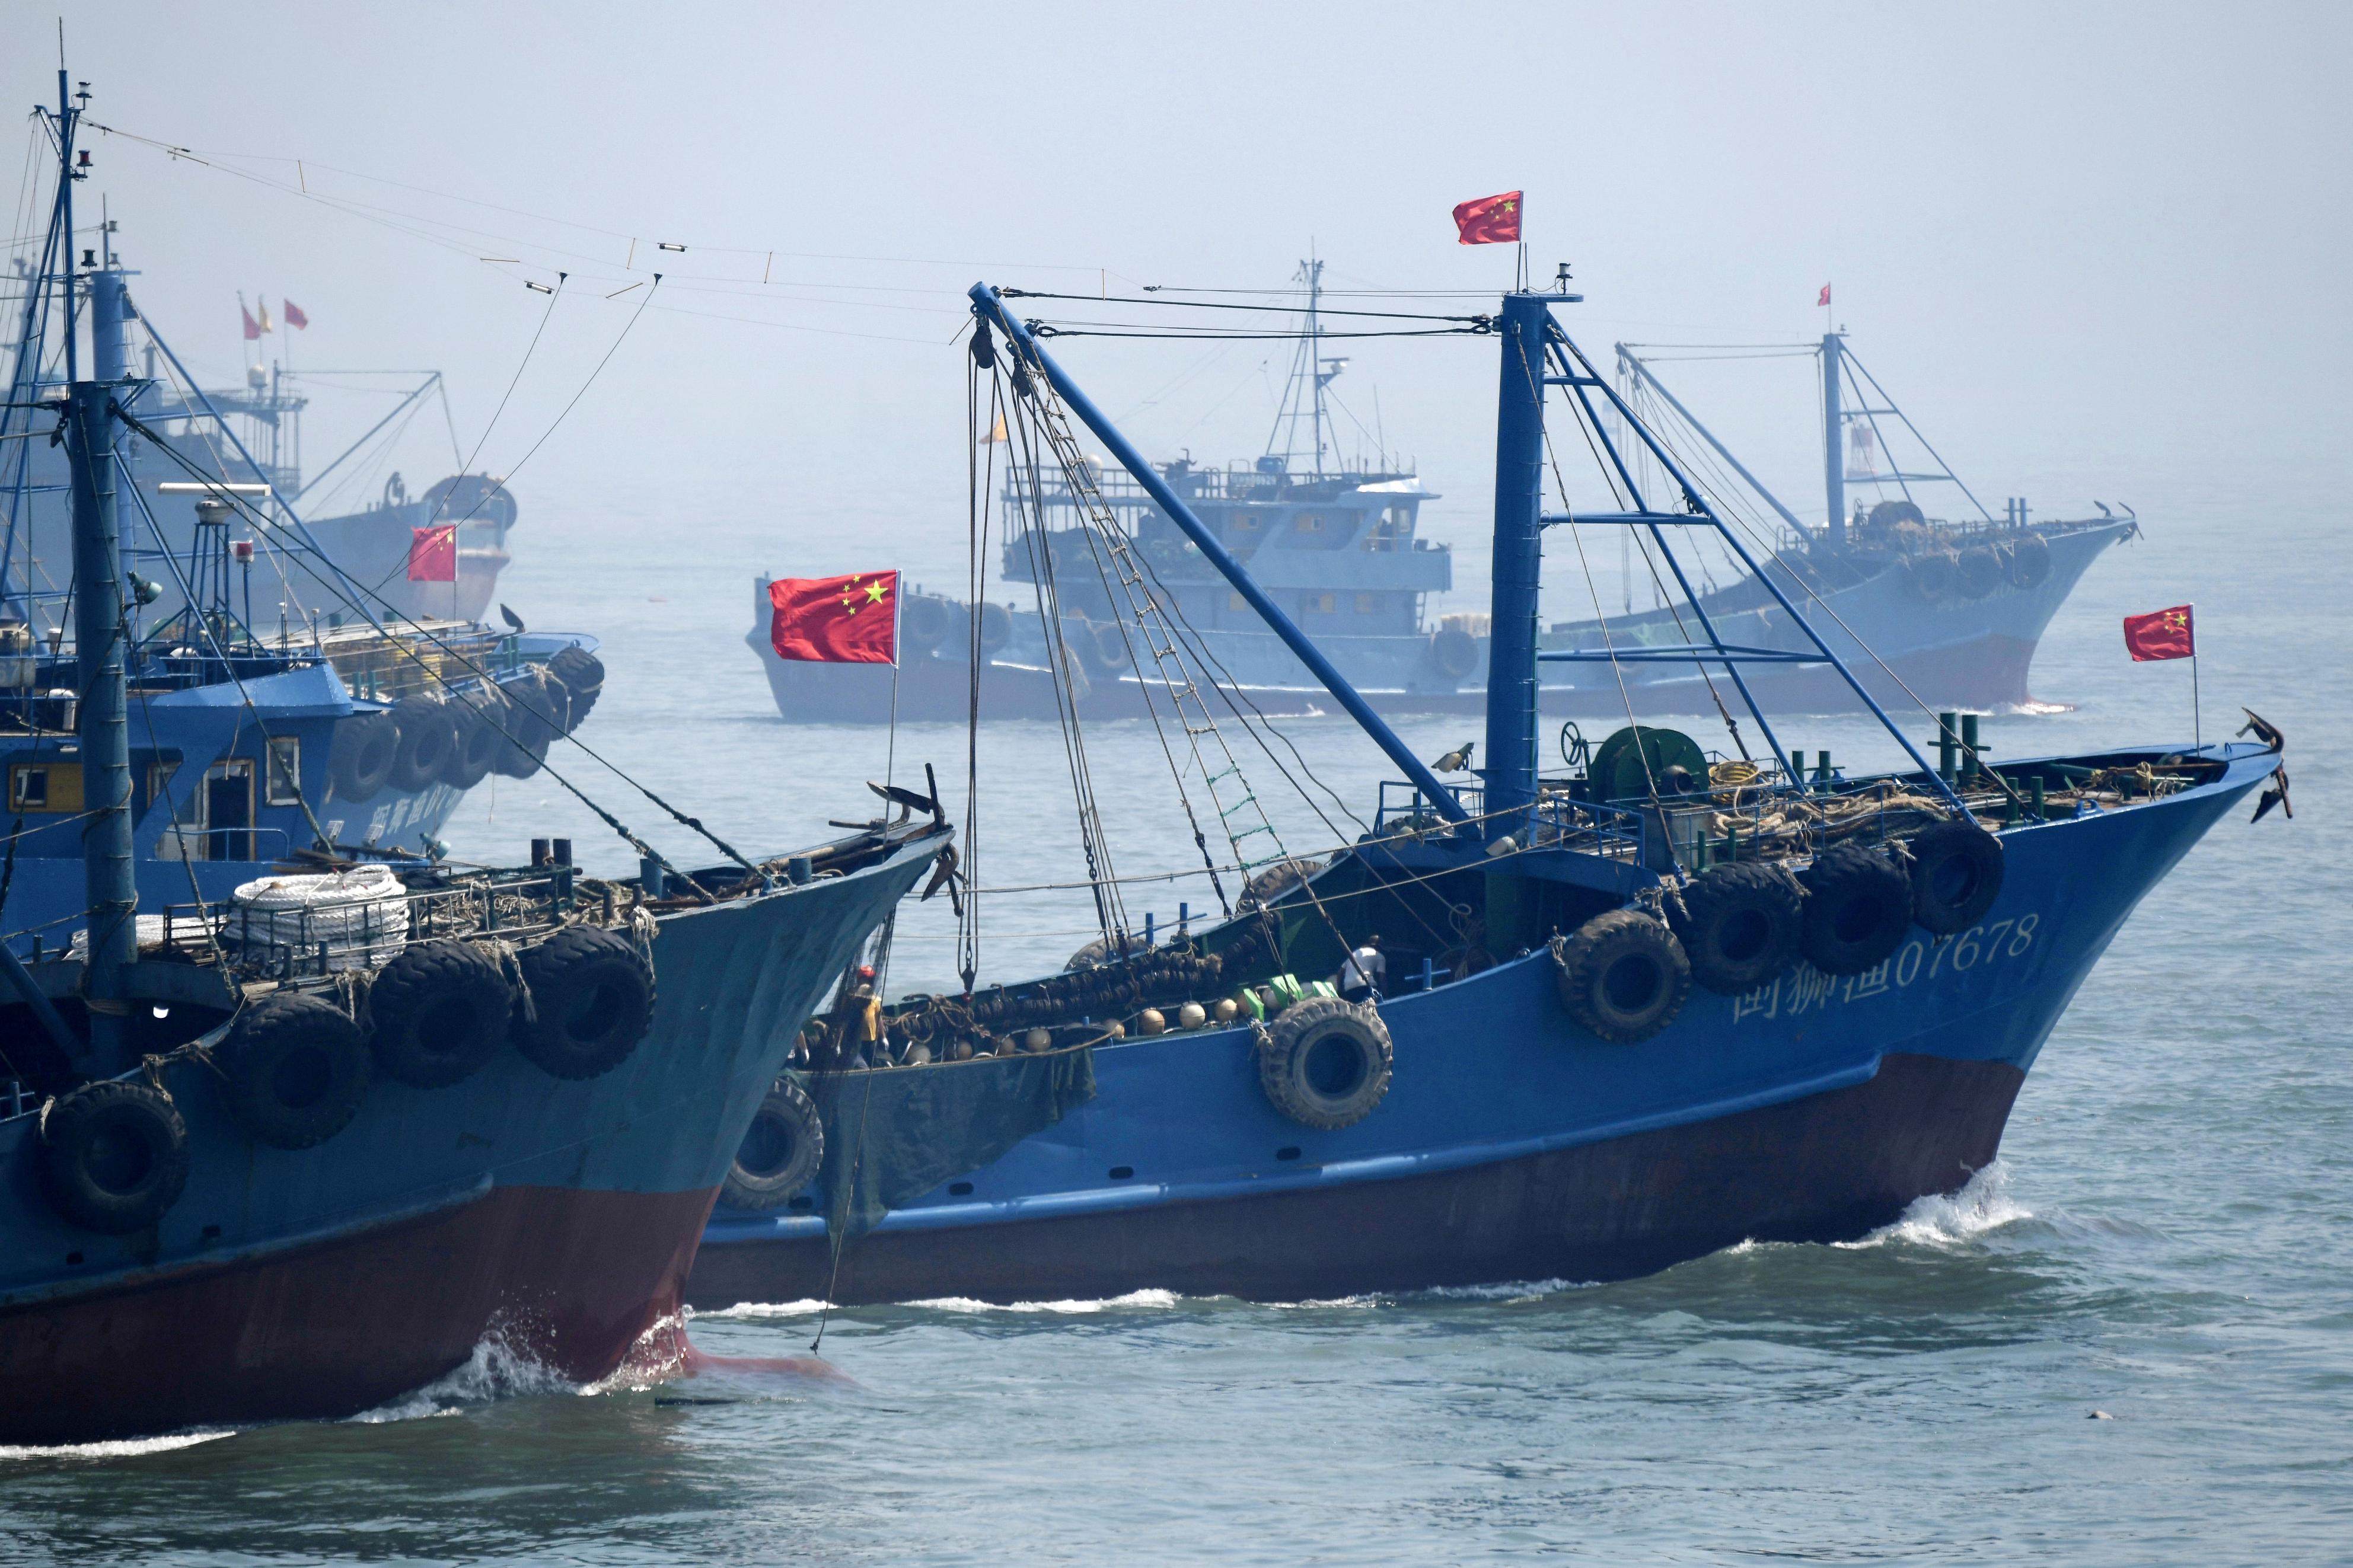 Authorities in China’s north have ordered fishing boats to be on alert and “avoid risks” after an unidentified object was spotted in local waters. Photo: Kyodo